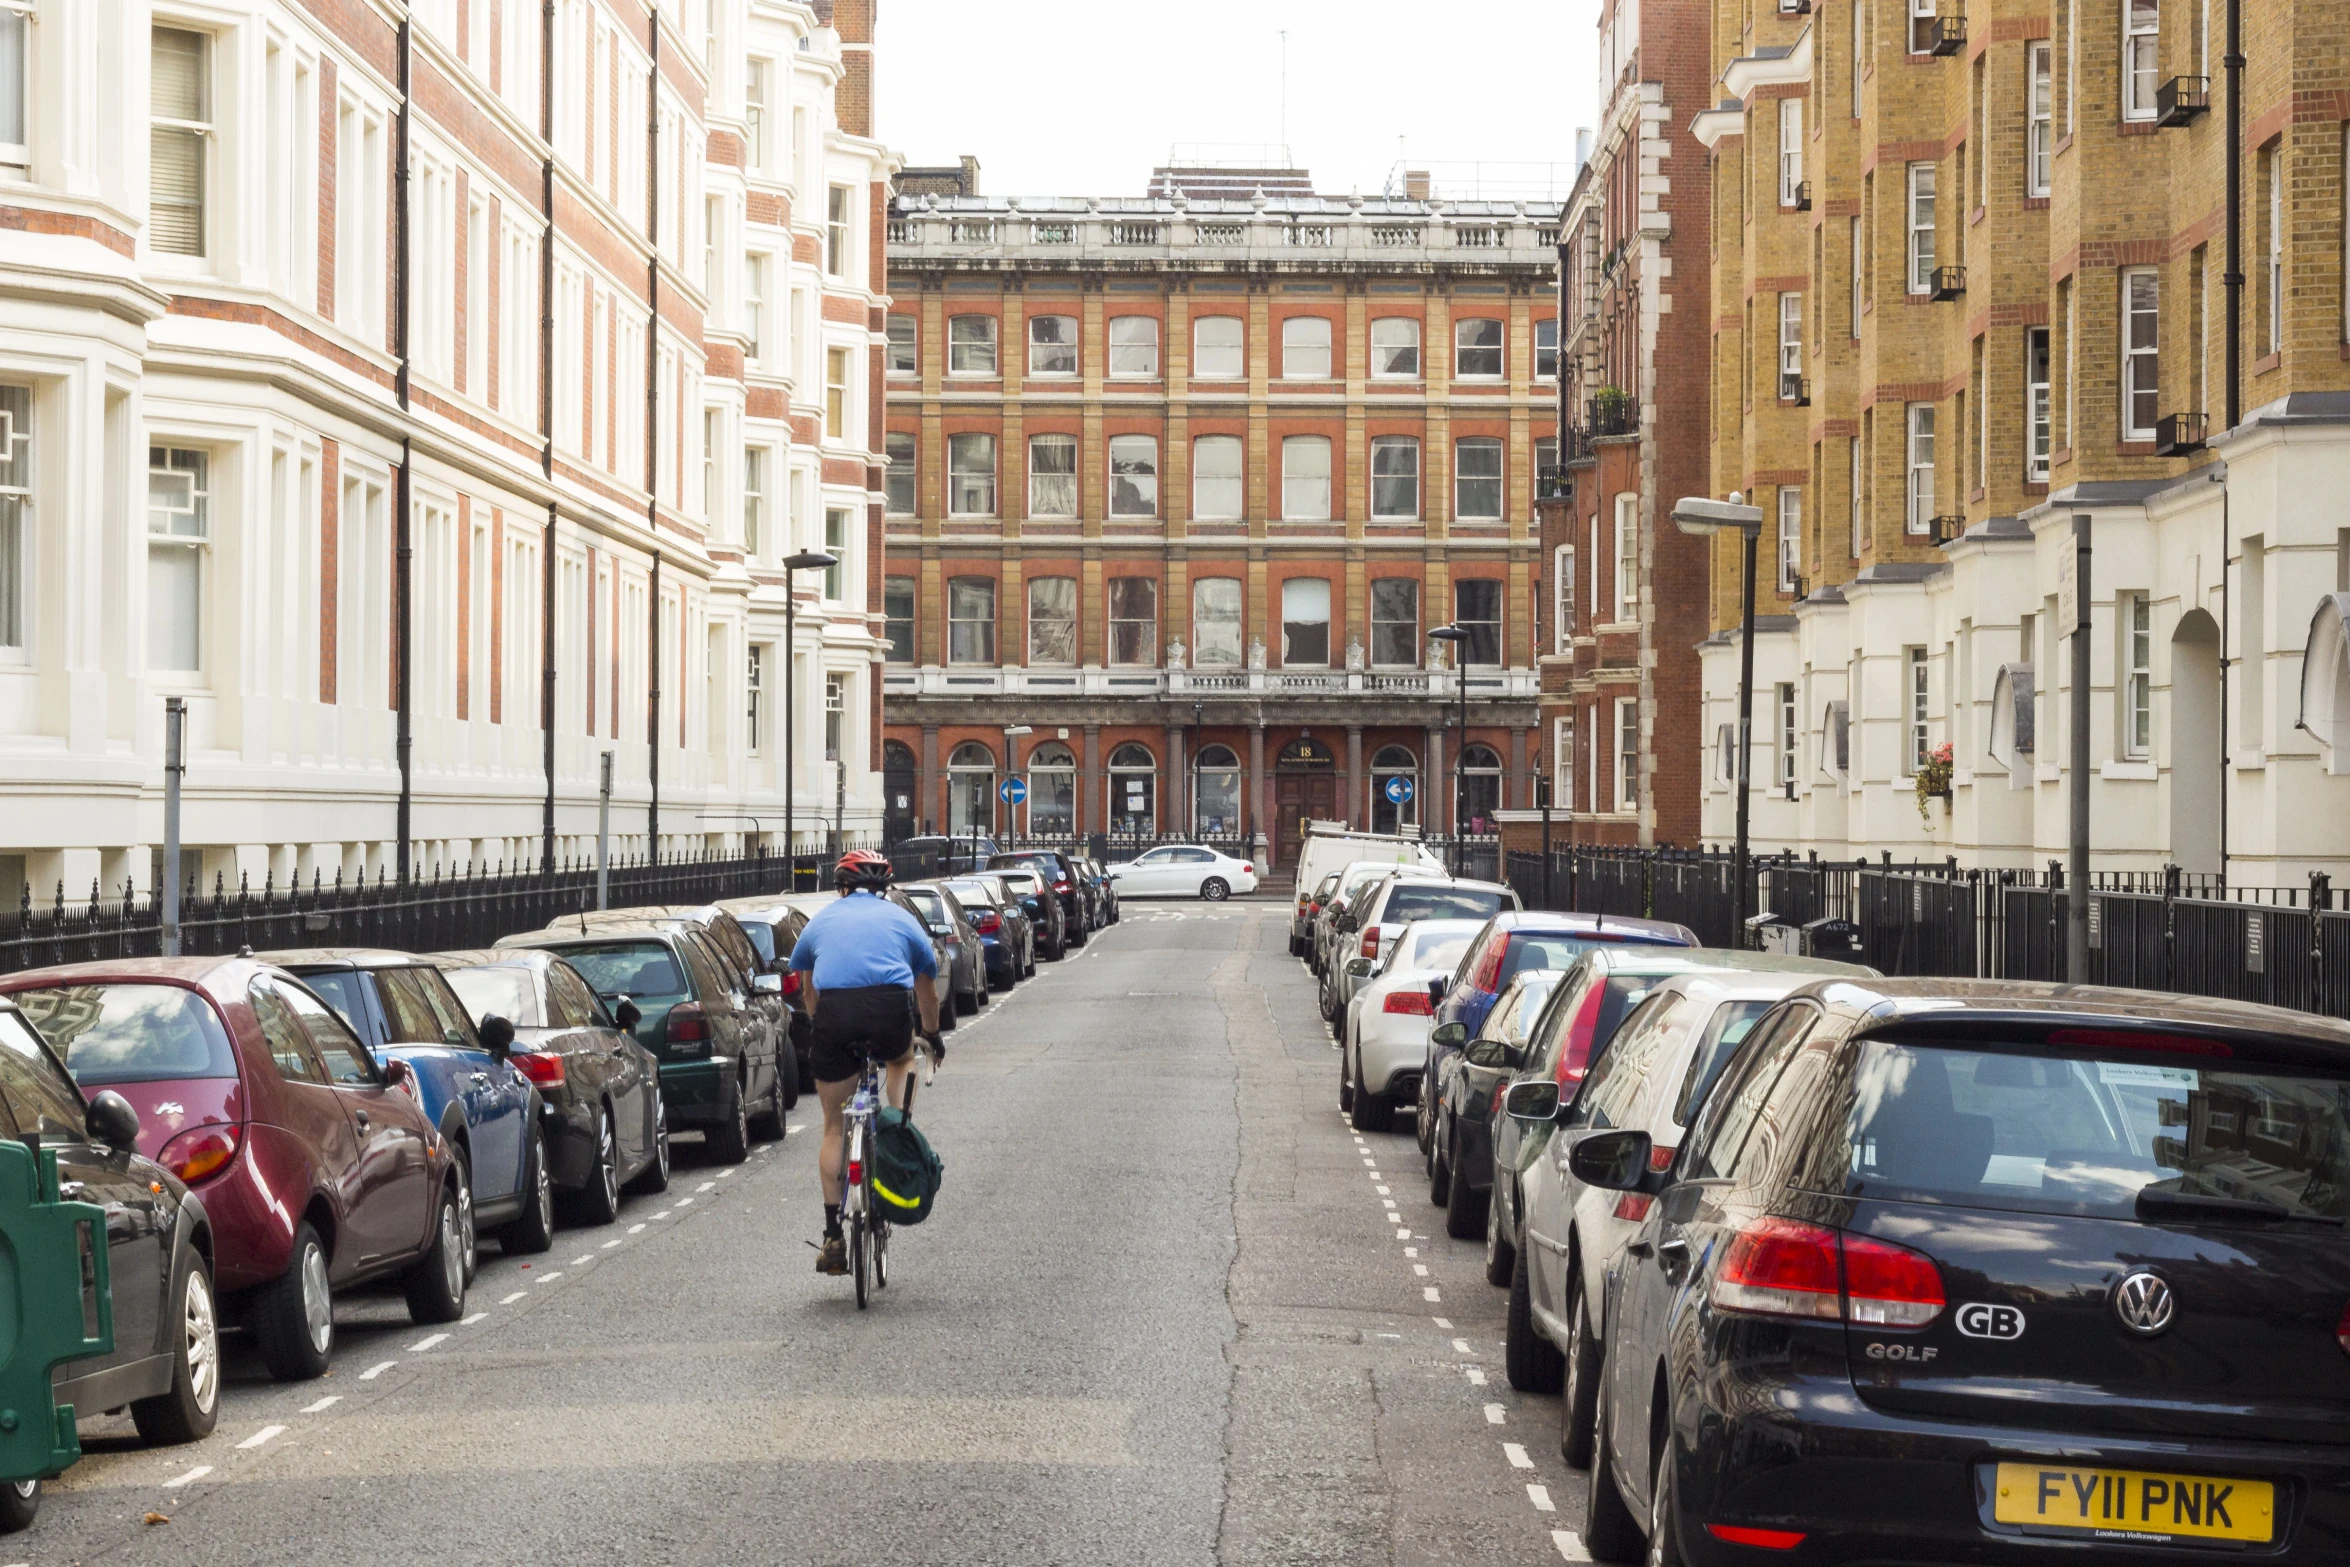 a cyclist rides on the street between several parked cars